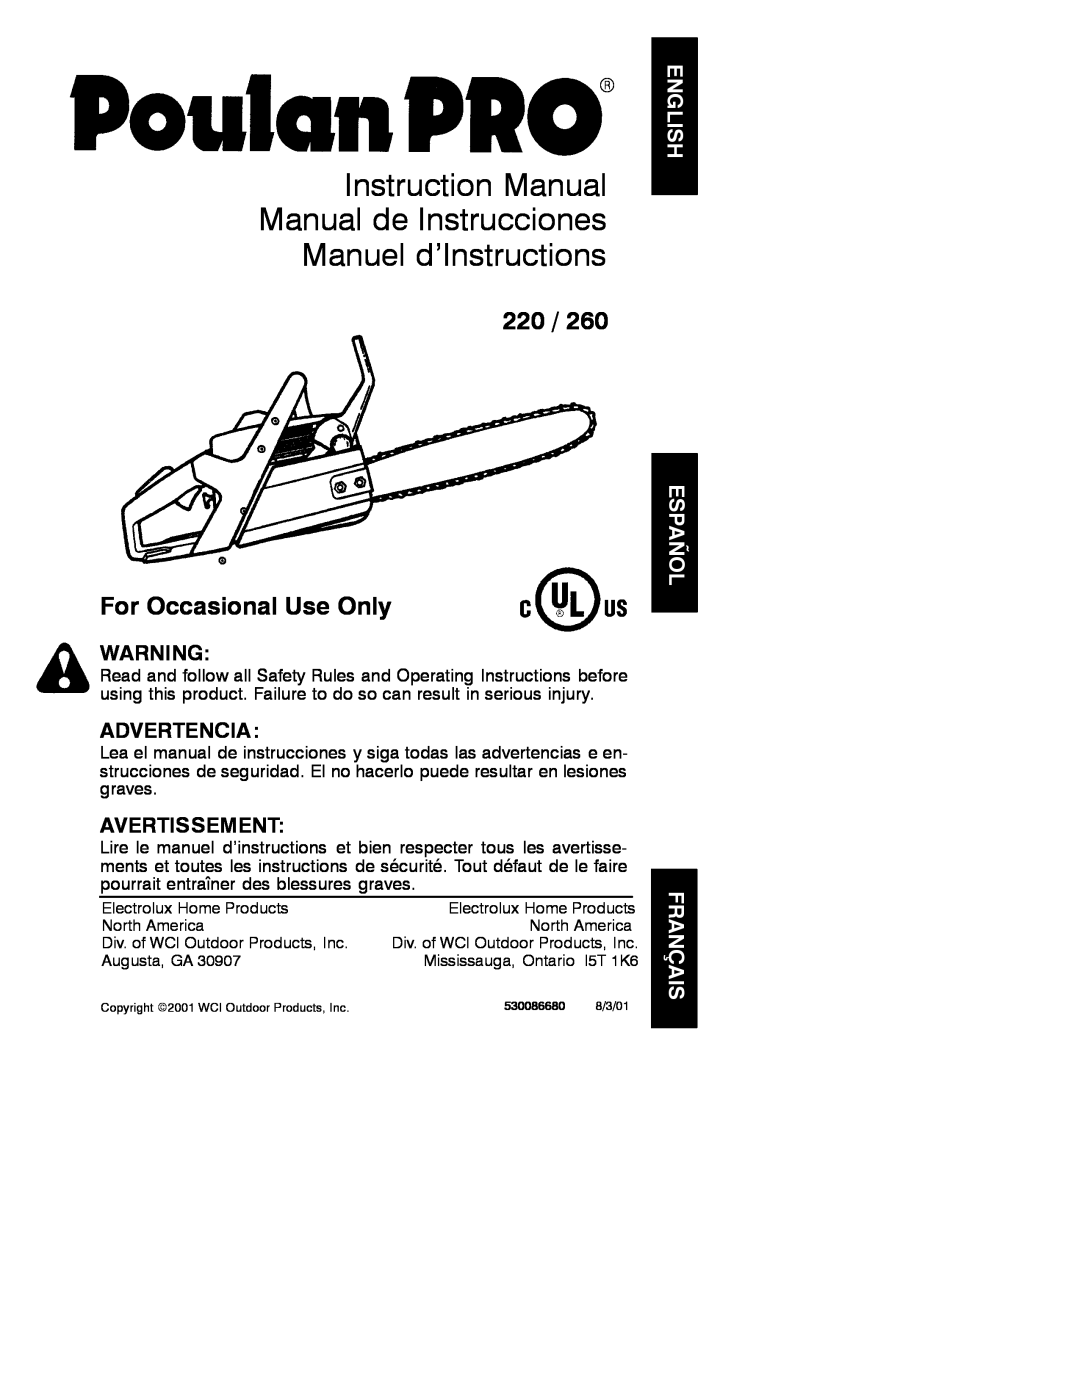 Poulan 530086680 instruction manual For Occasional Use Only, Advertencia, Avertissement 